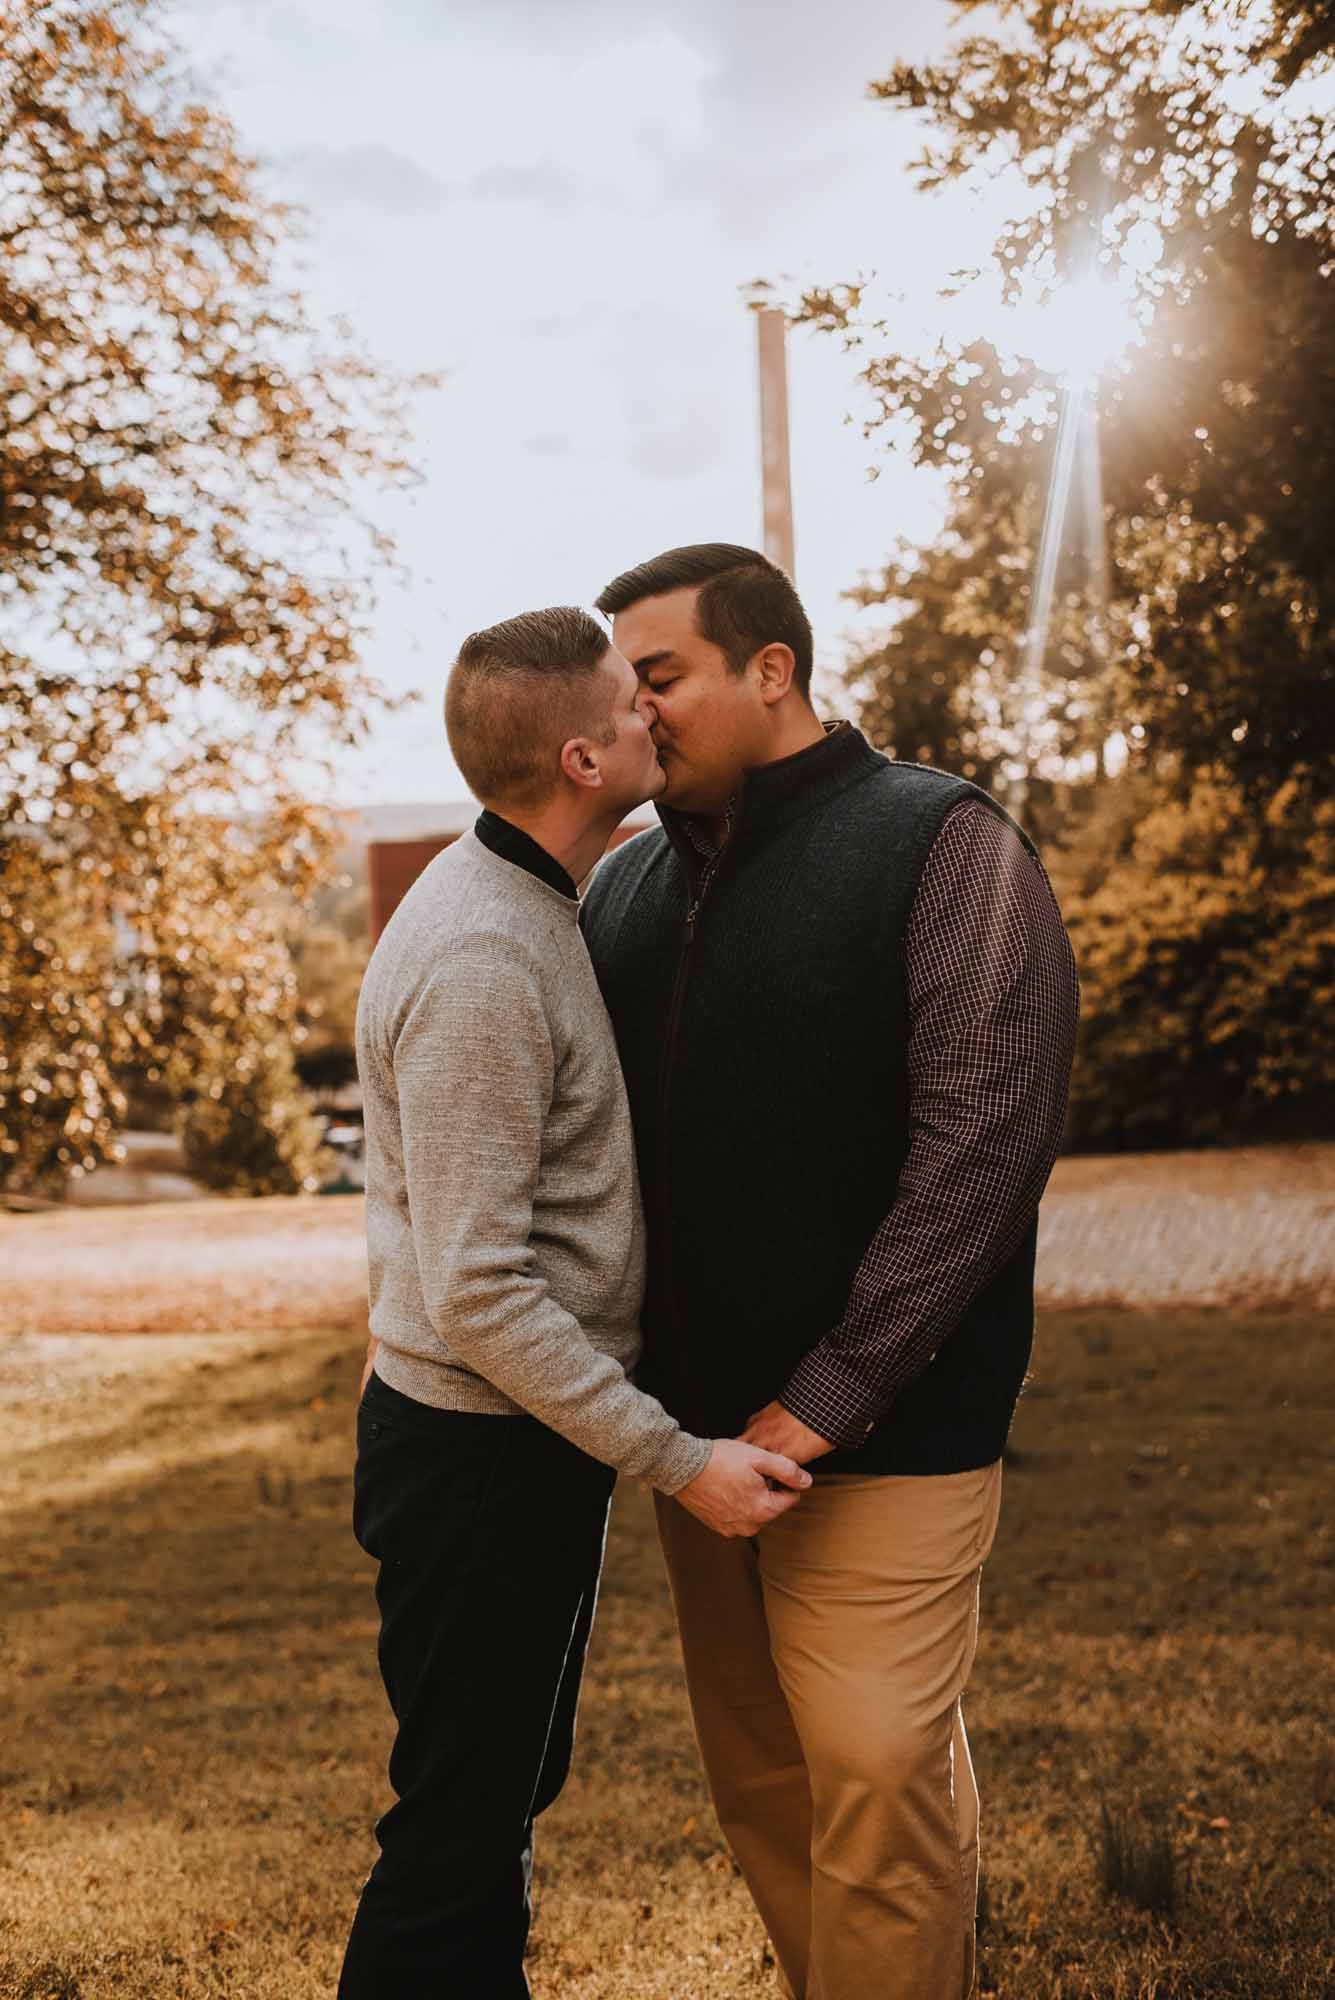 We are already blessed, with or without the Catholic church | Arianna Belle Photography | Featured on Equally Wed, the leading LGBTQ+ wedding magazine 